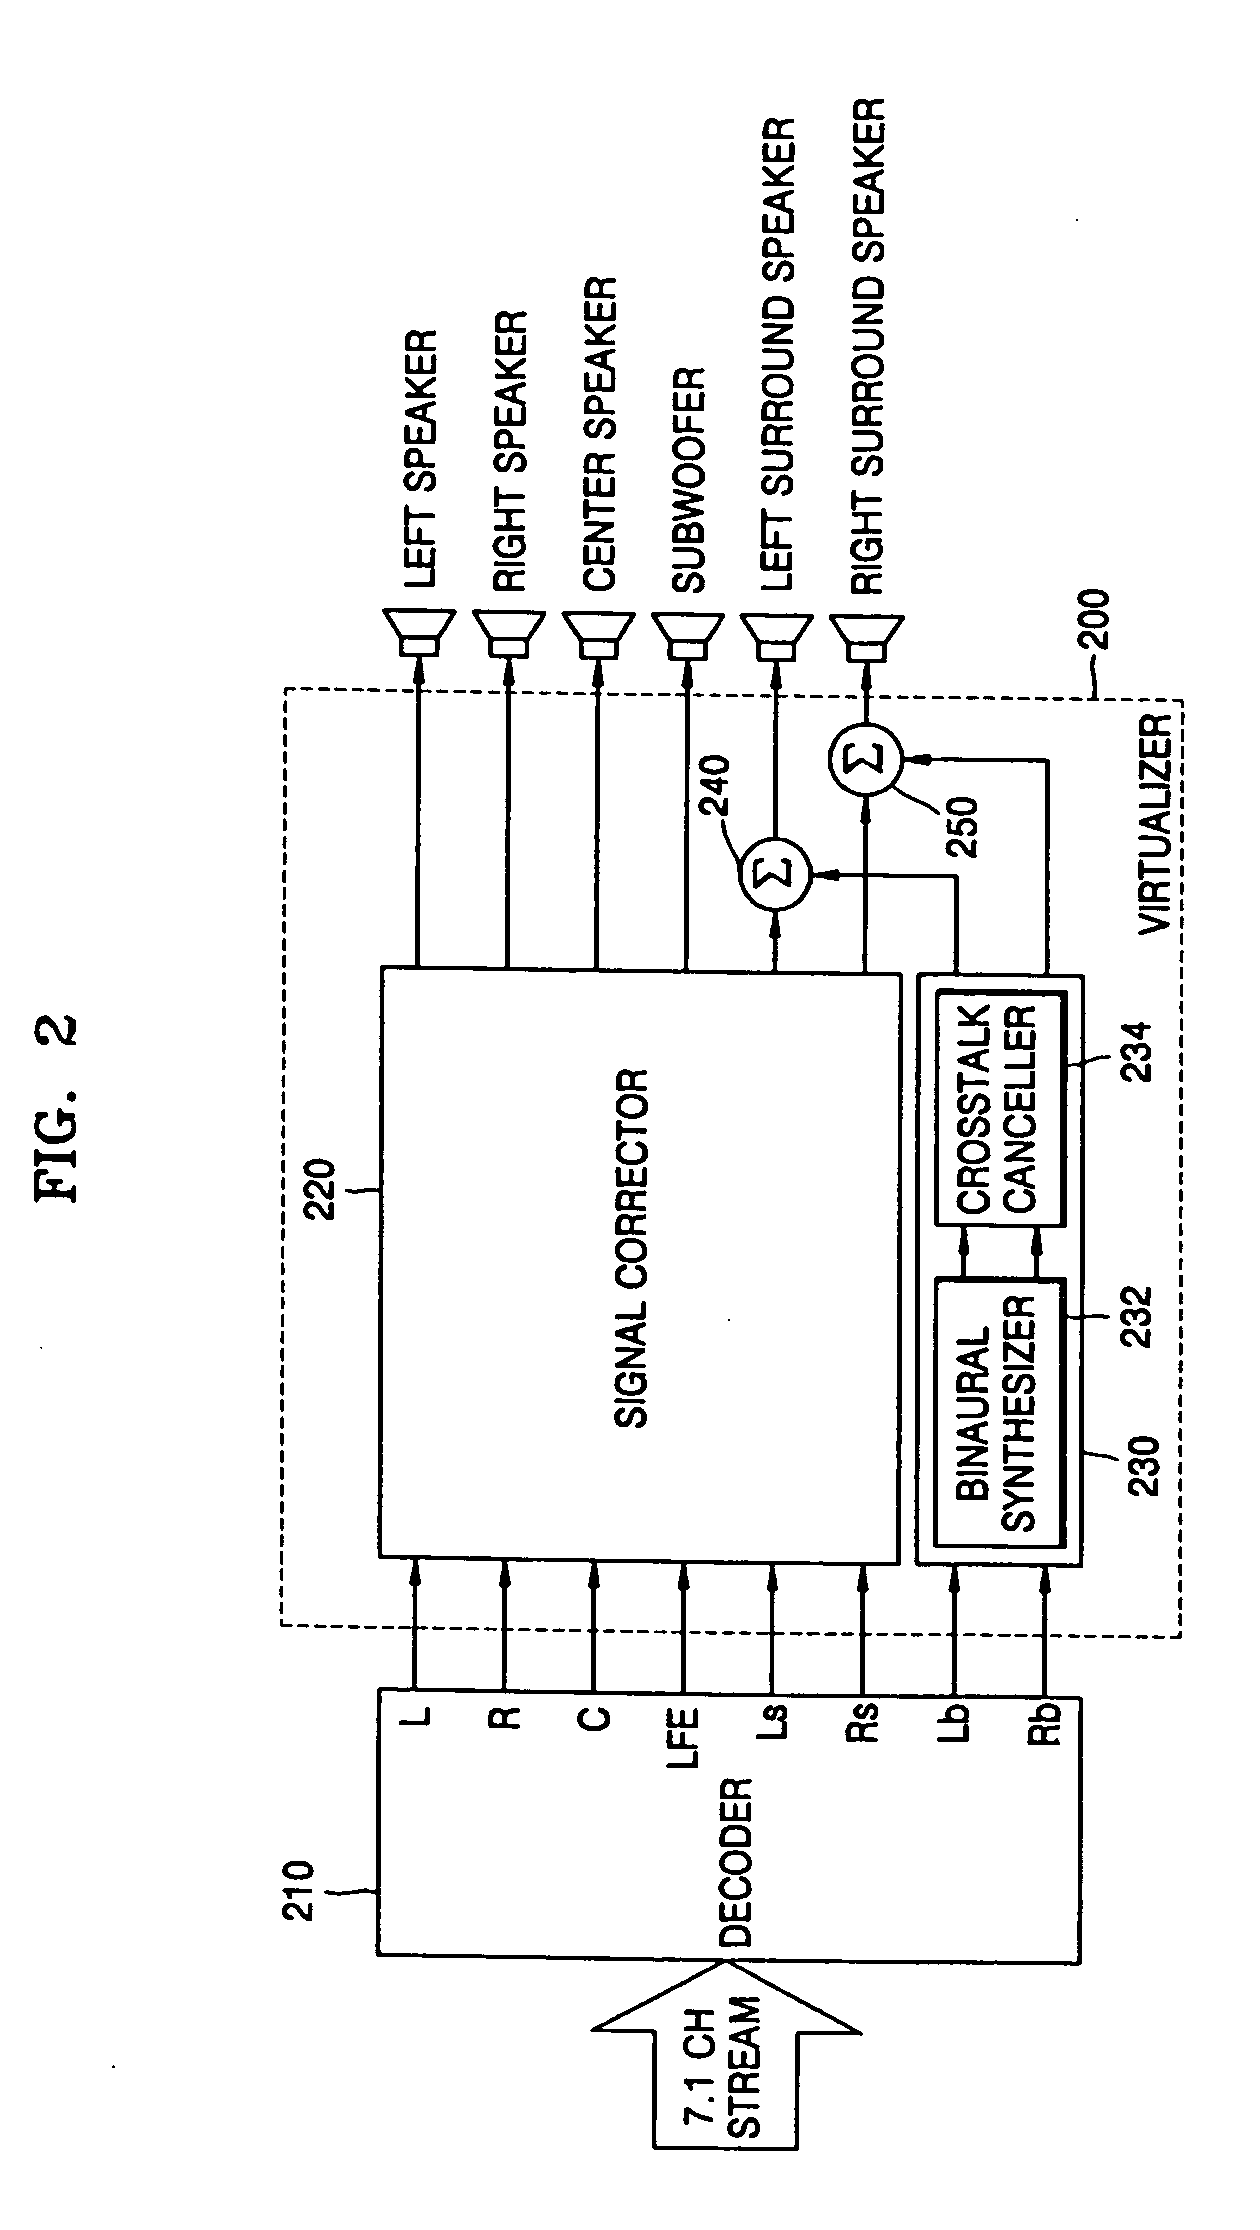 Apparatus and method of reproducing a 7.1 channel sound